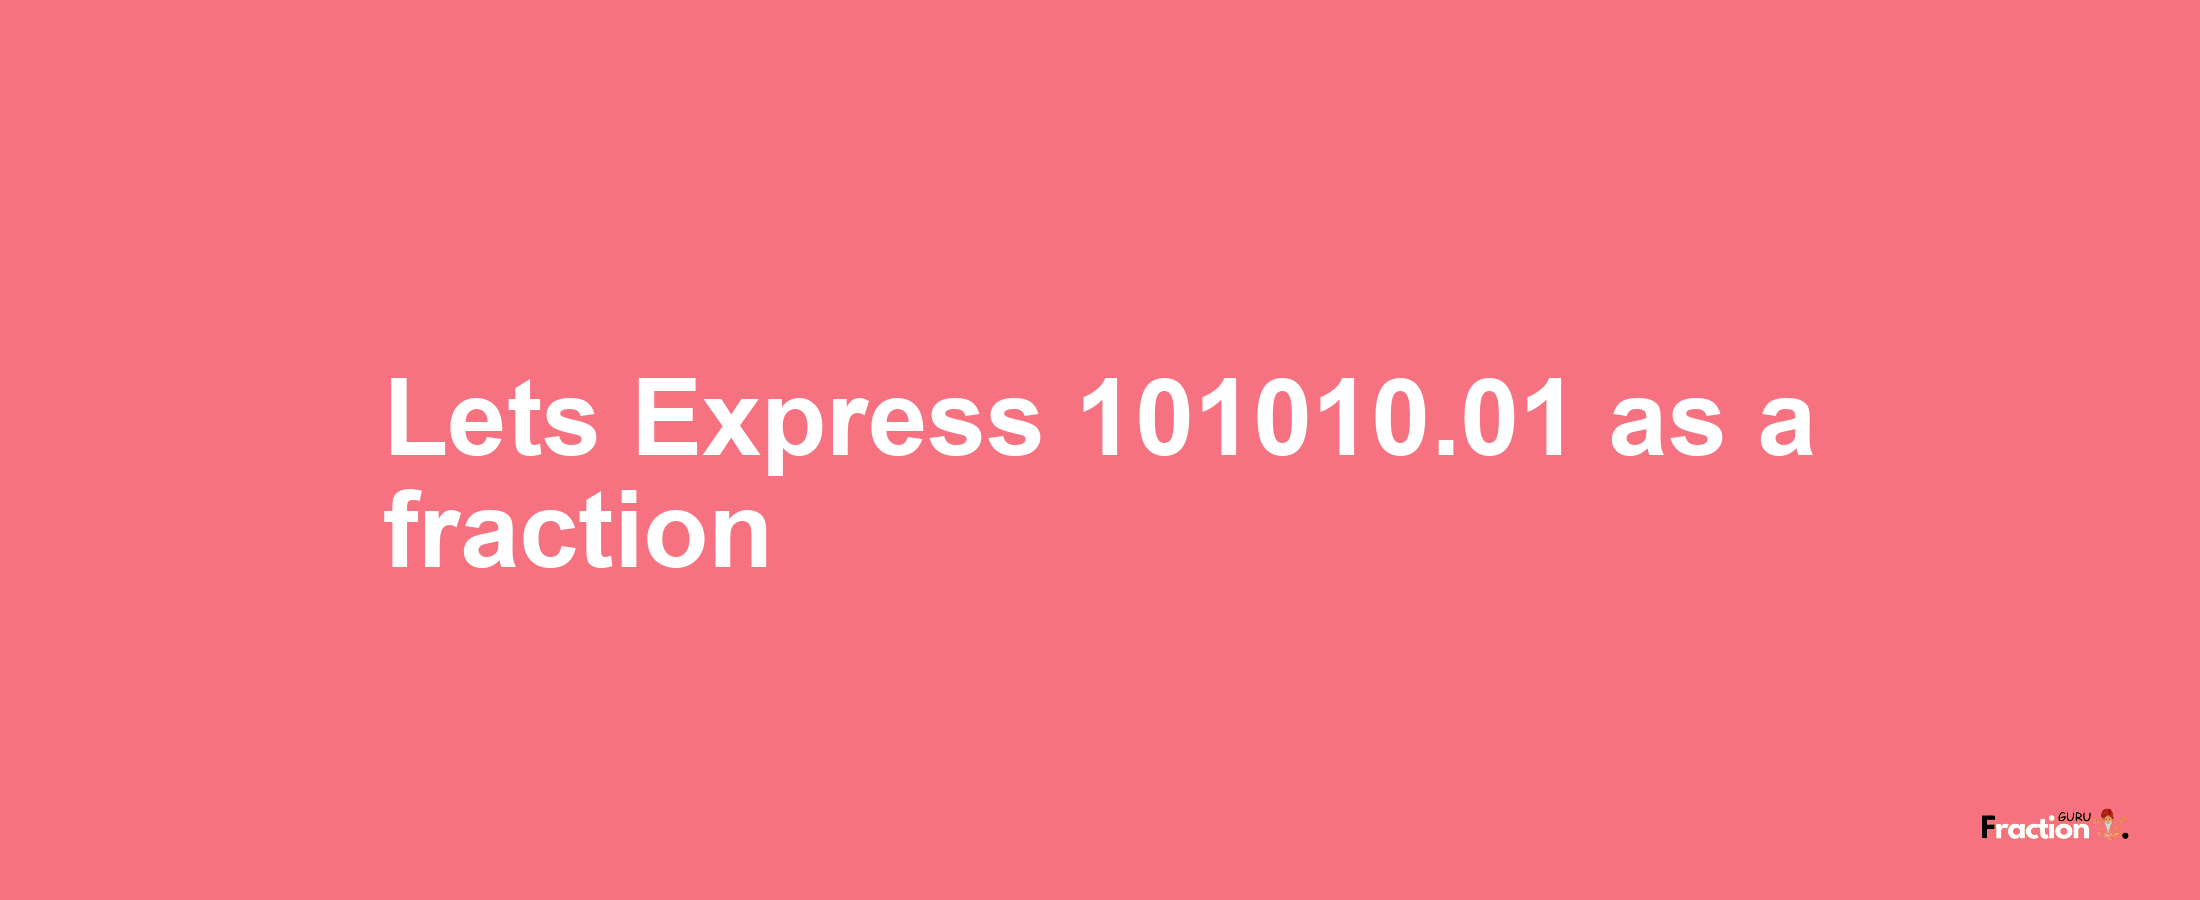 Lets Express 101010.01 as afraction